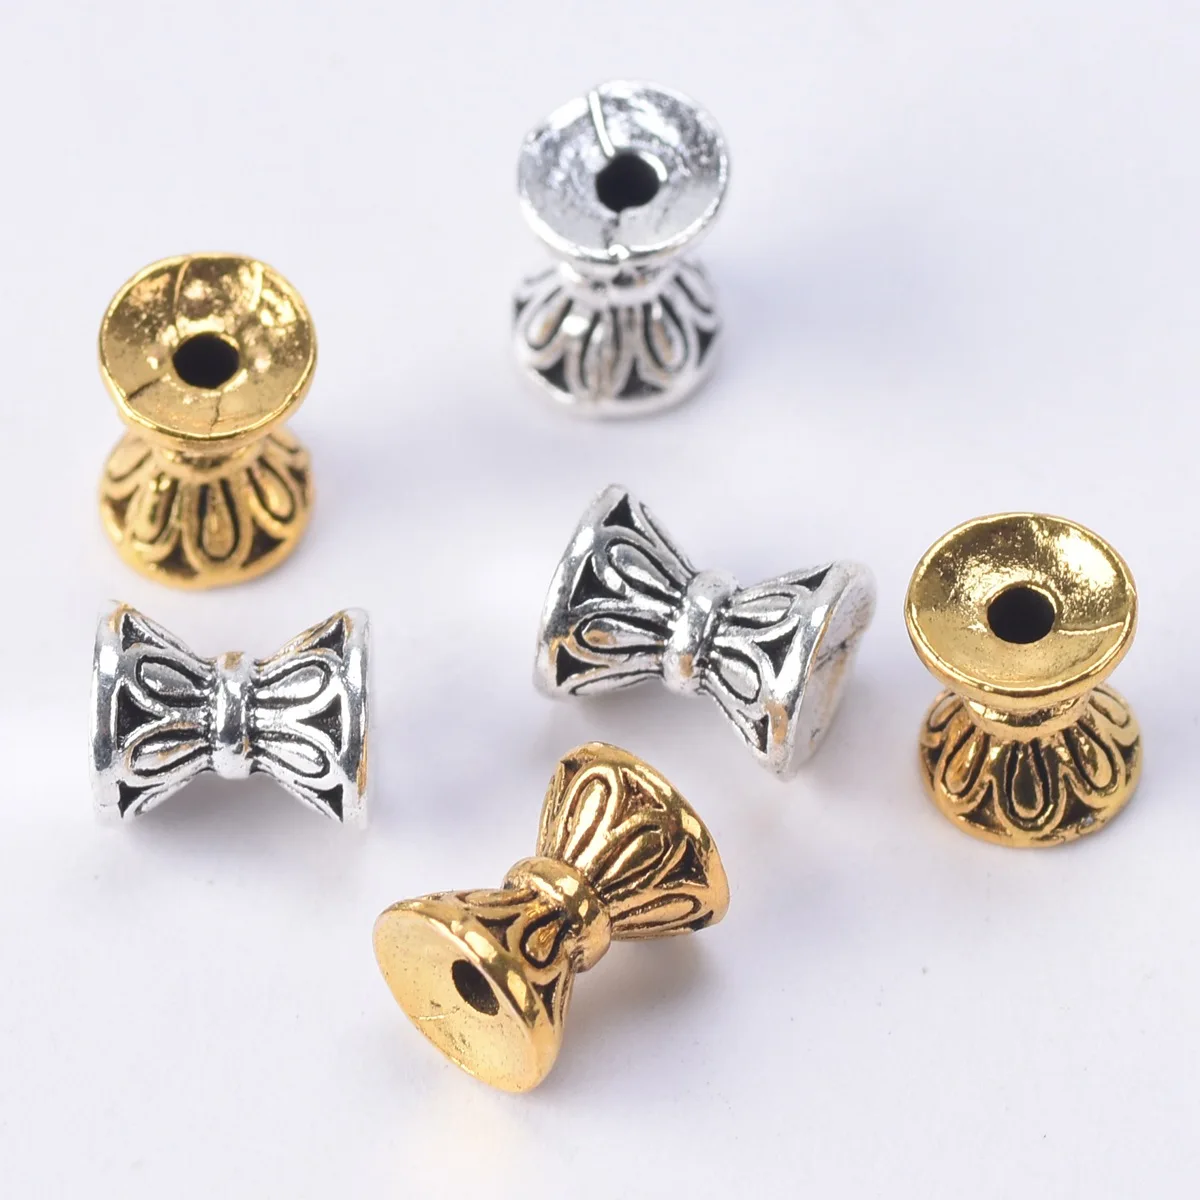 30pcs 6x5mm Hourglass Shape Antique Gold Tibetan Silver Loose Metal Spacer Beads 